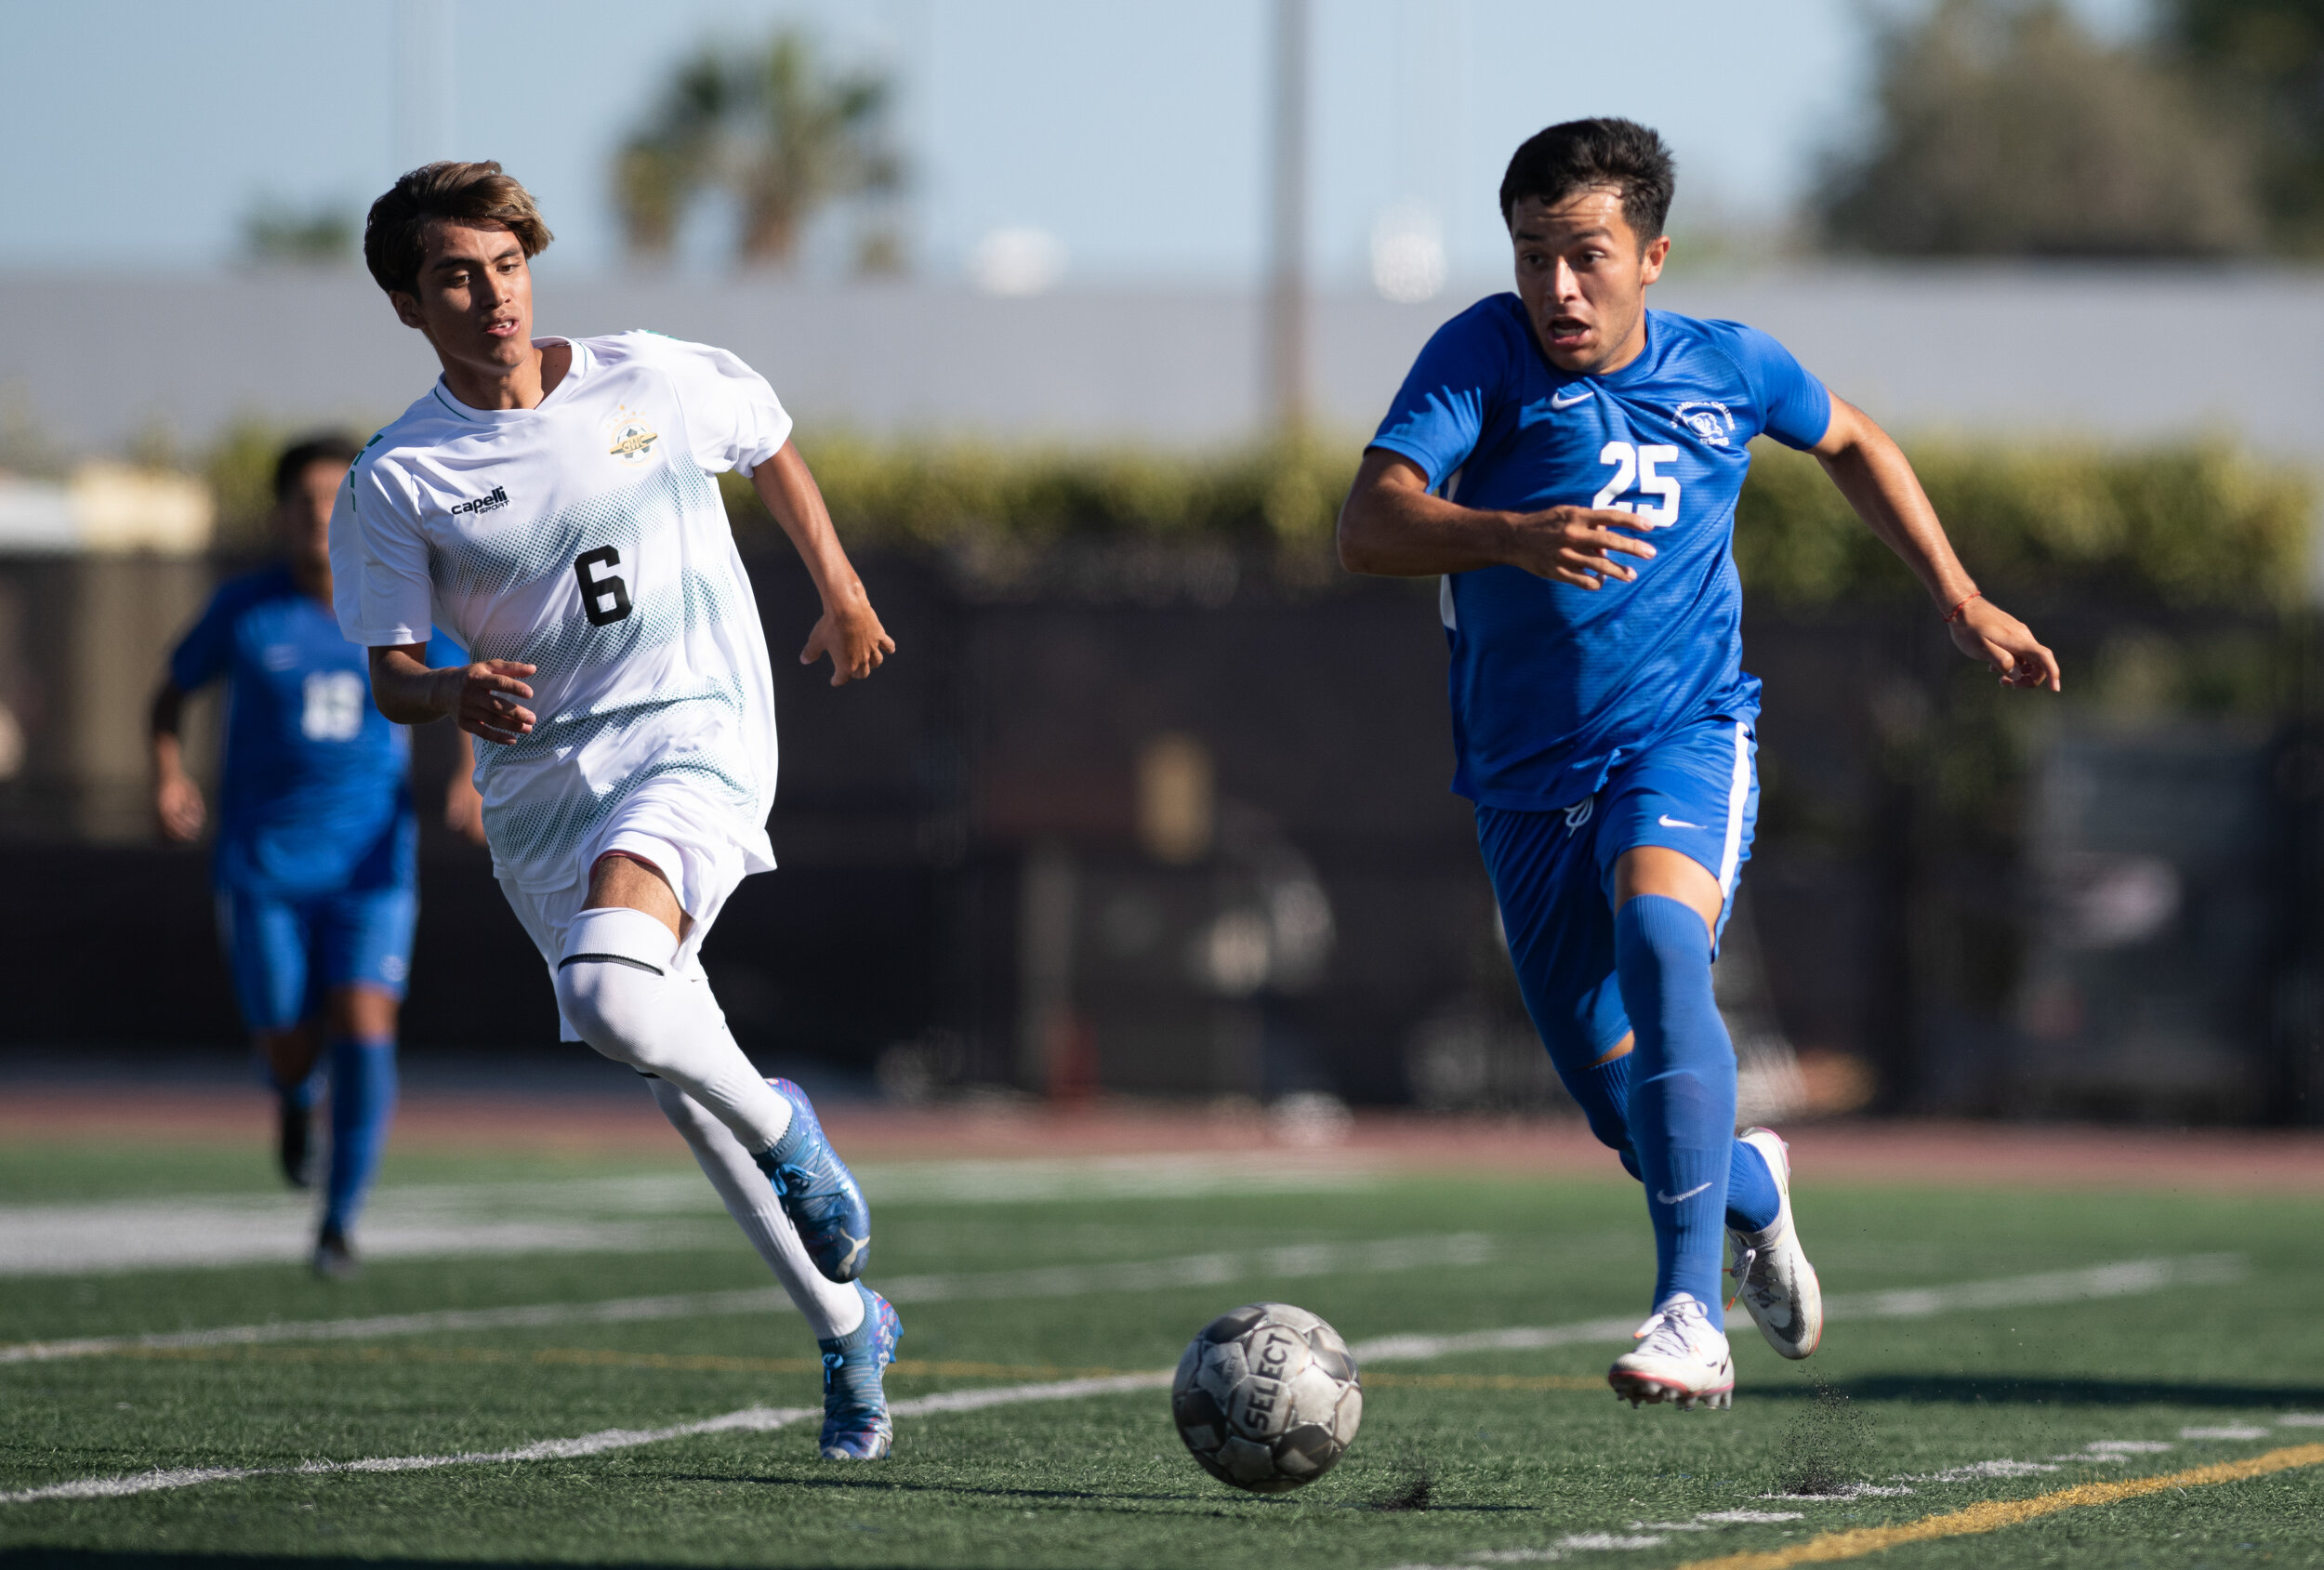  SMC freshman Luis Heredia (25) dribbles the ball down the field as a defender frantically chases him down on September 21, 2021 at Santa Monica College in Santa Monica, Calif. (Jon Putman | The Corsair) 